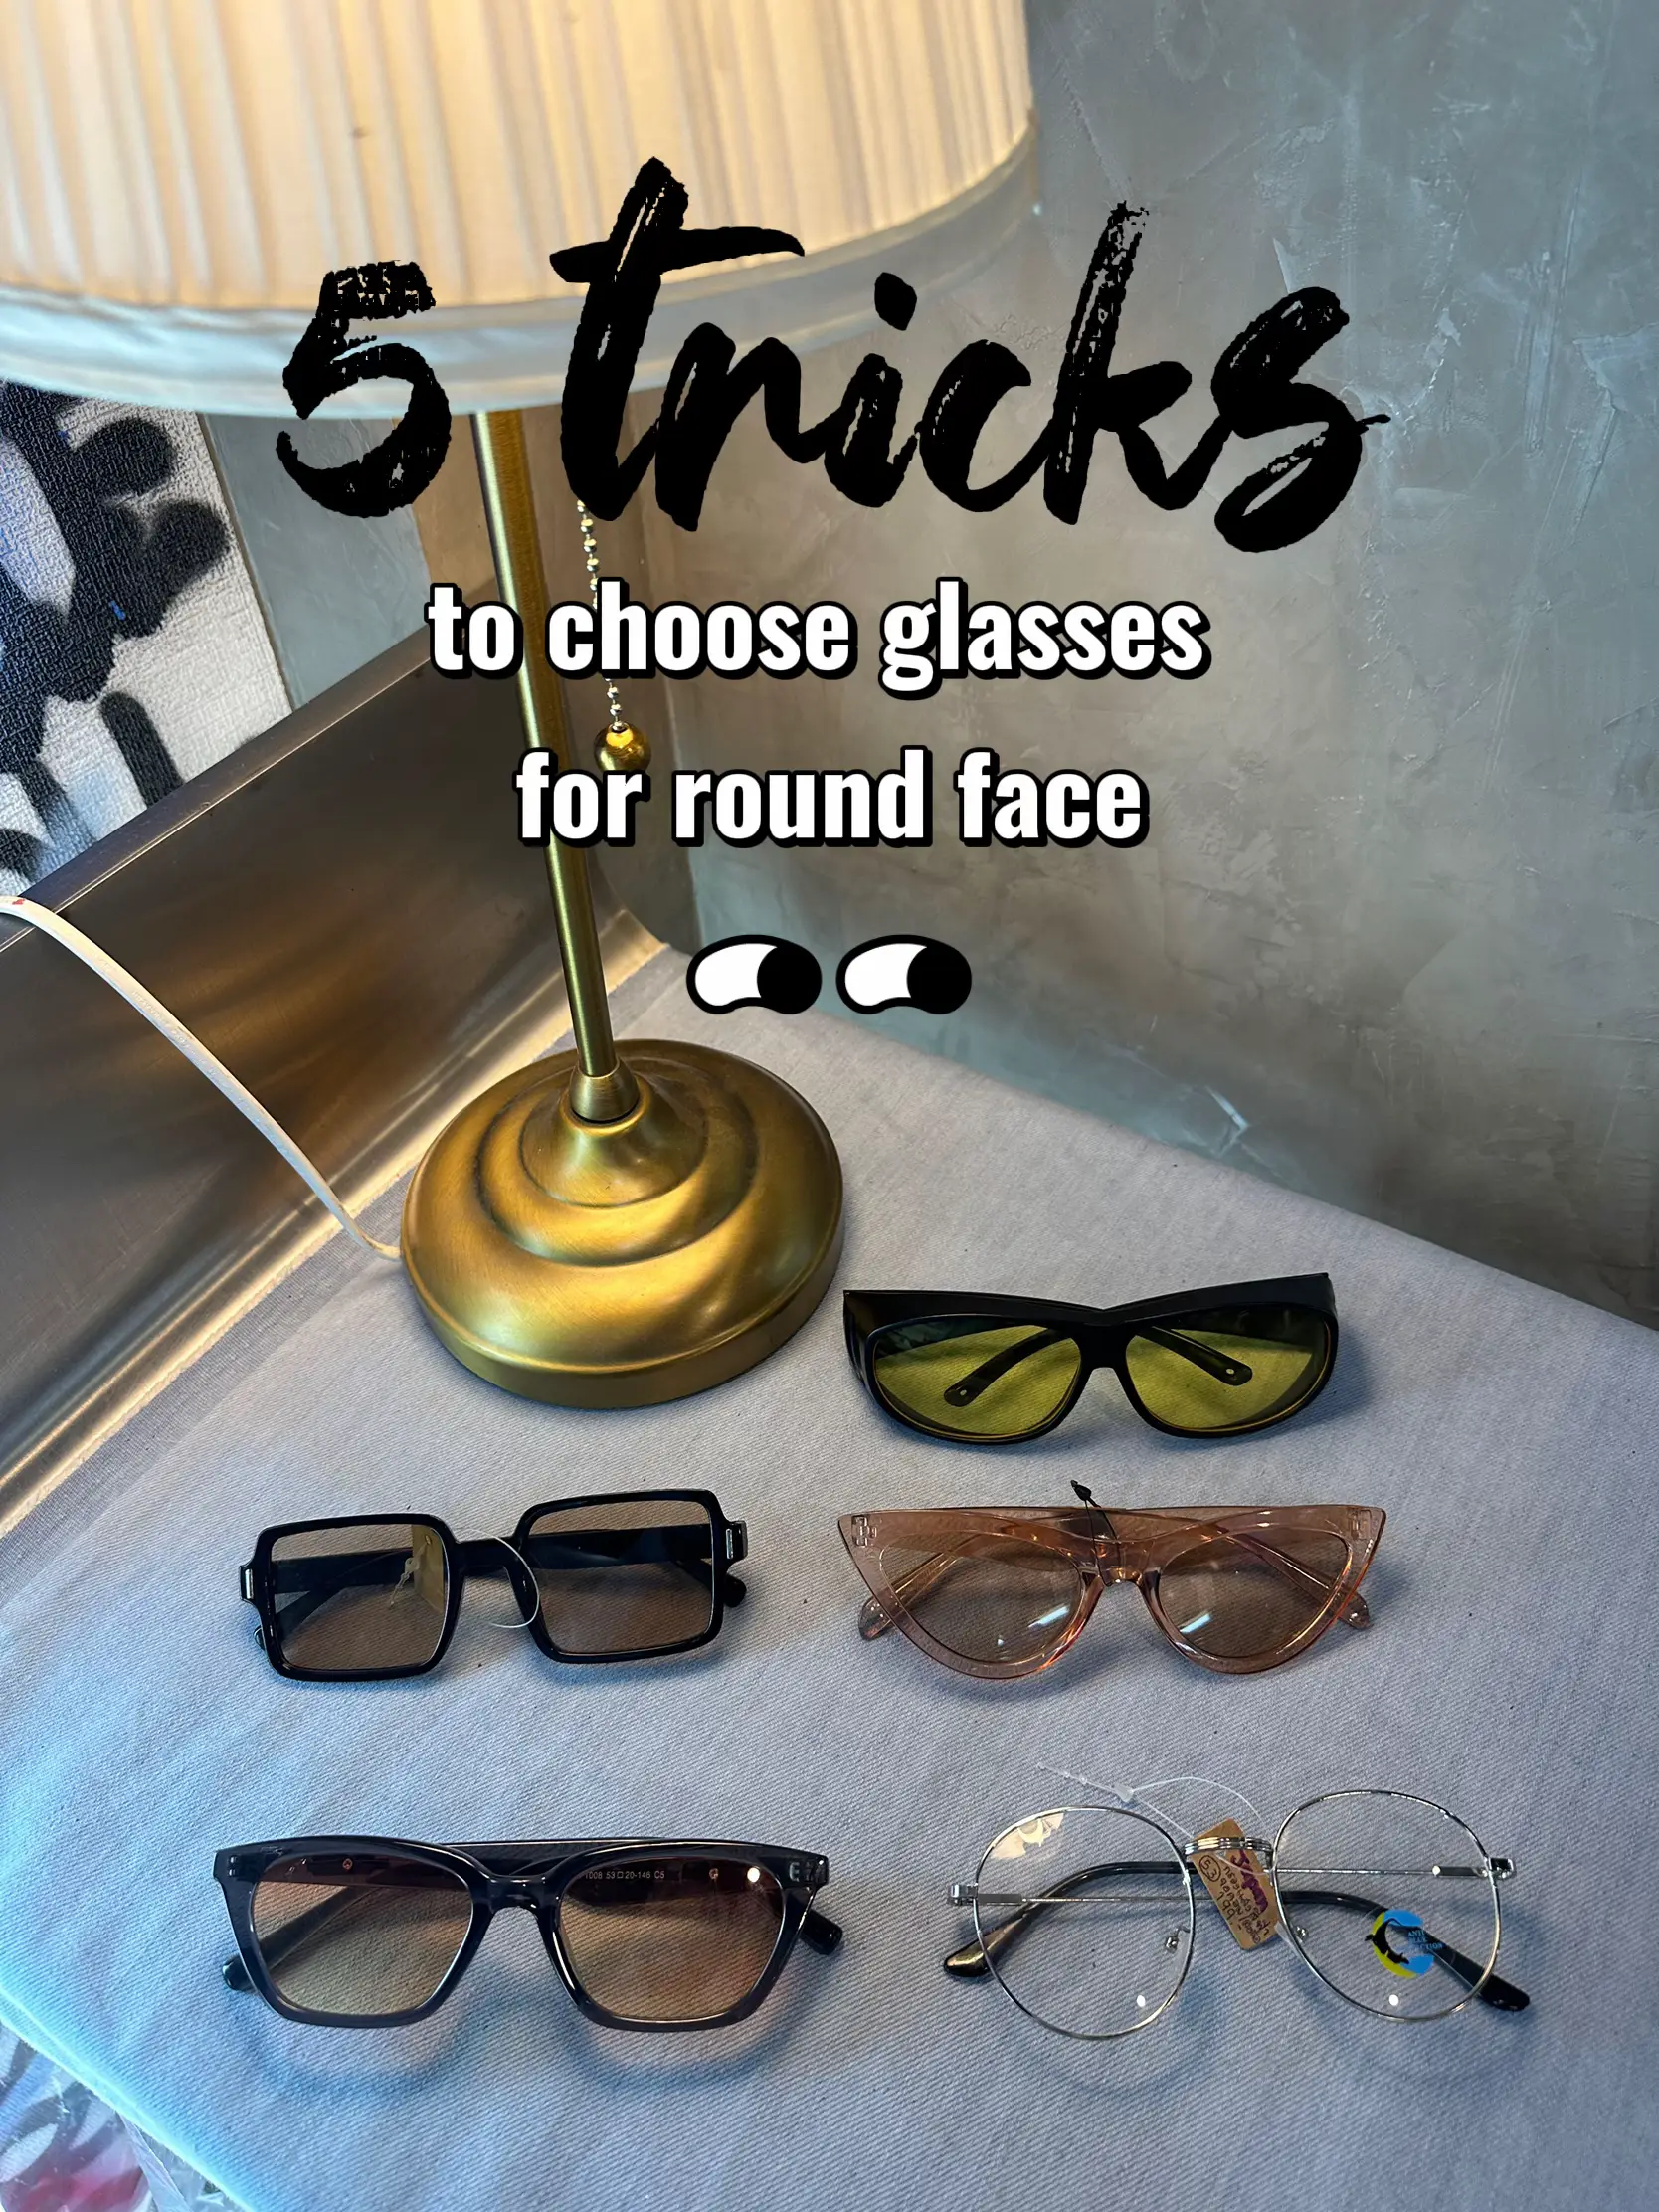 If I have a round face, how can I choose nice glasses?